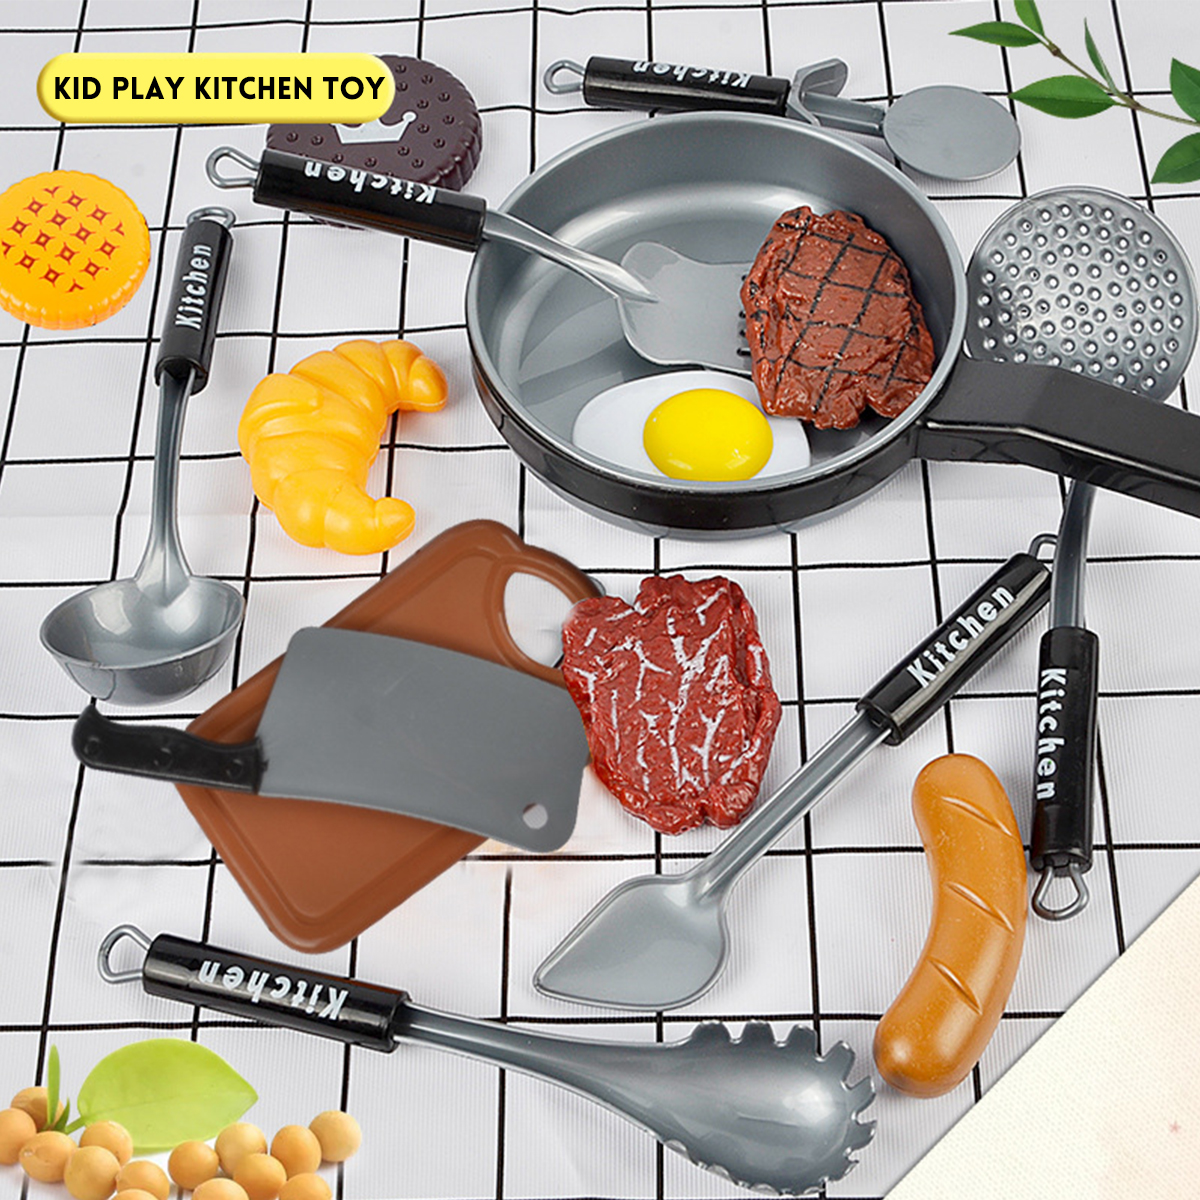 16/36 Pcs Kid Play House Toy ABS Plastic Kitchen Cooking Pots Pans Food Dishes Cookware Toys - Photo: 3